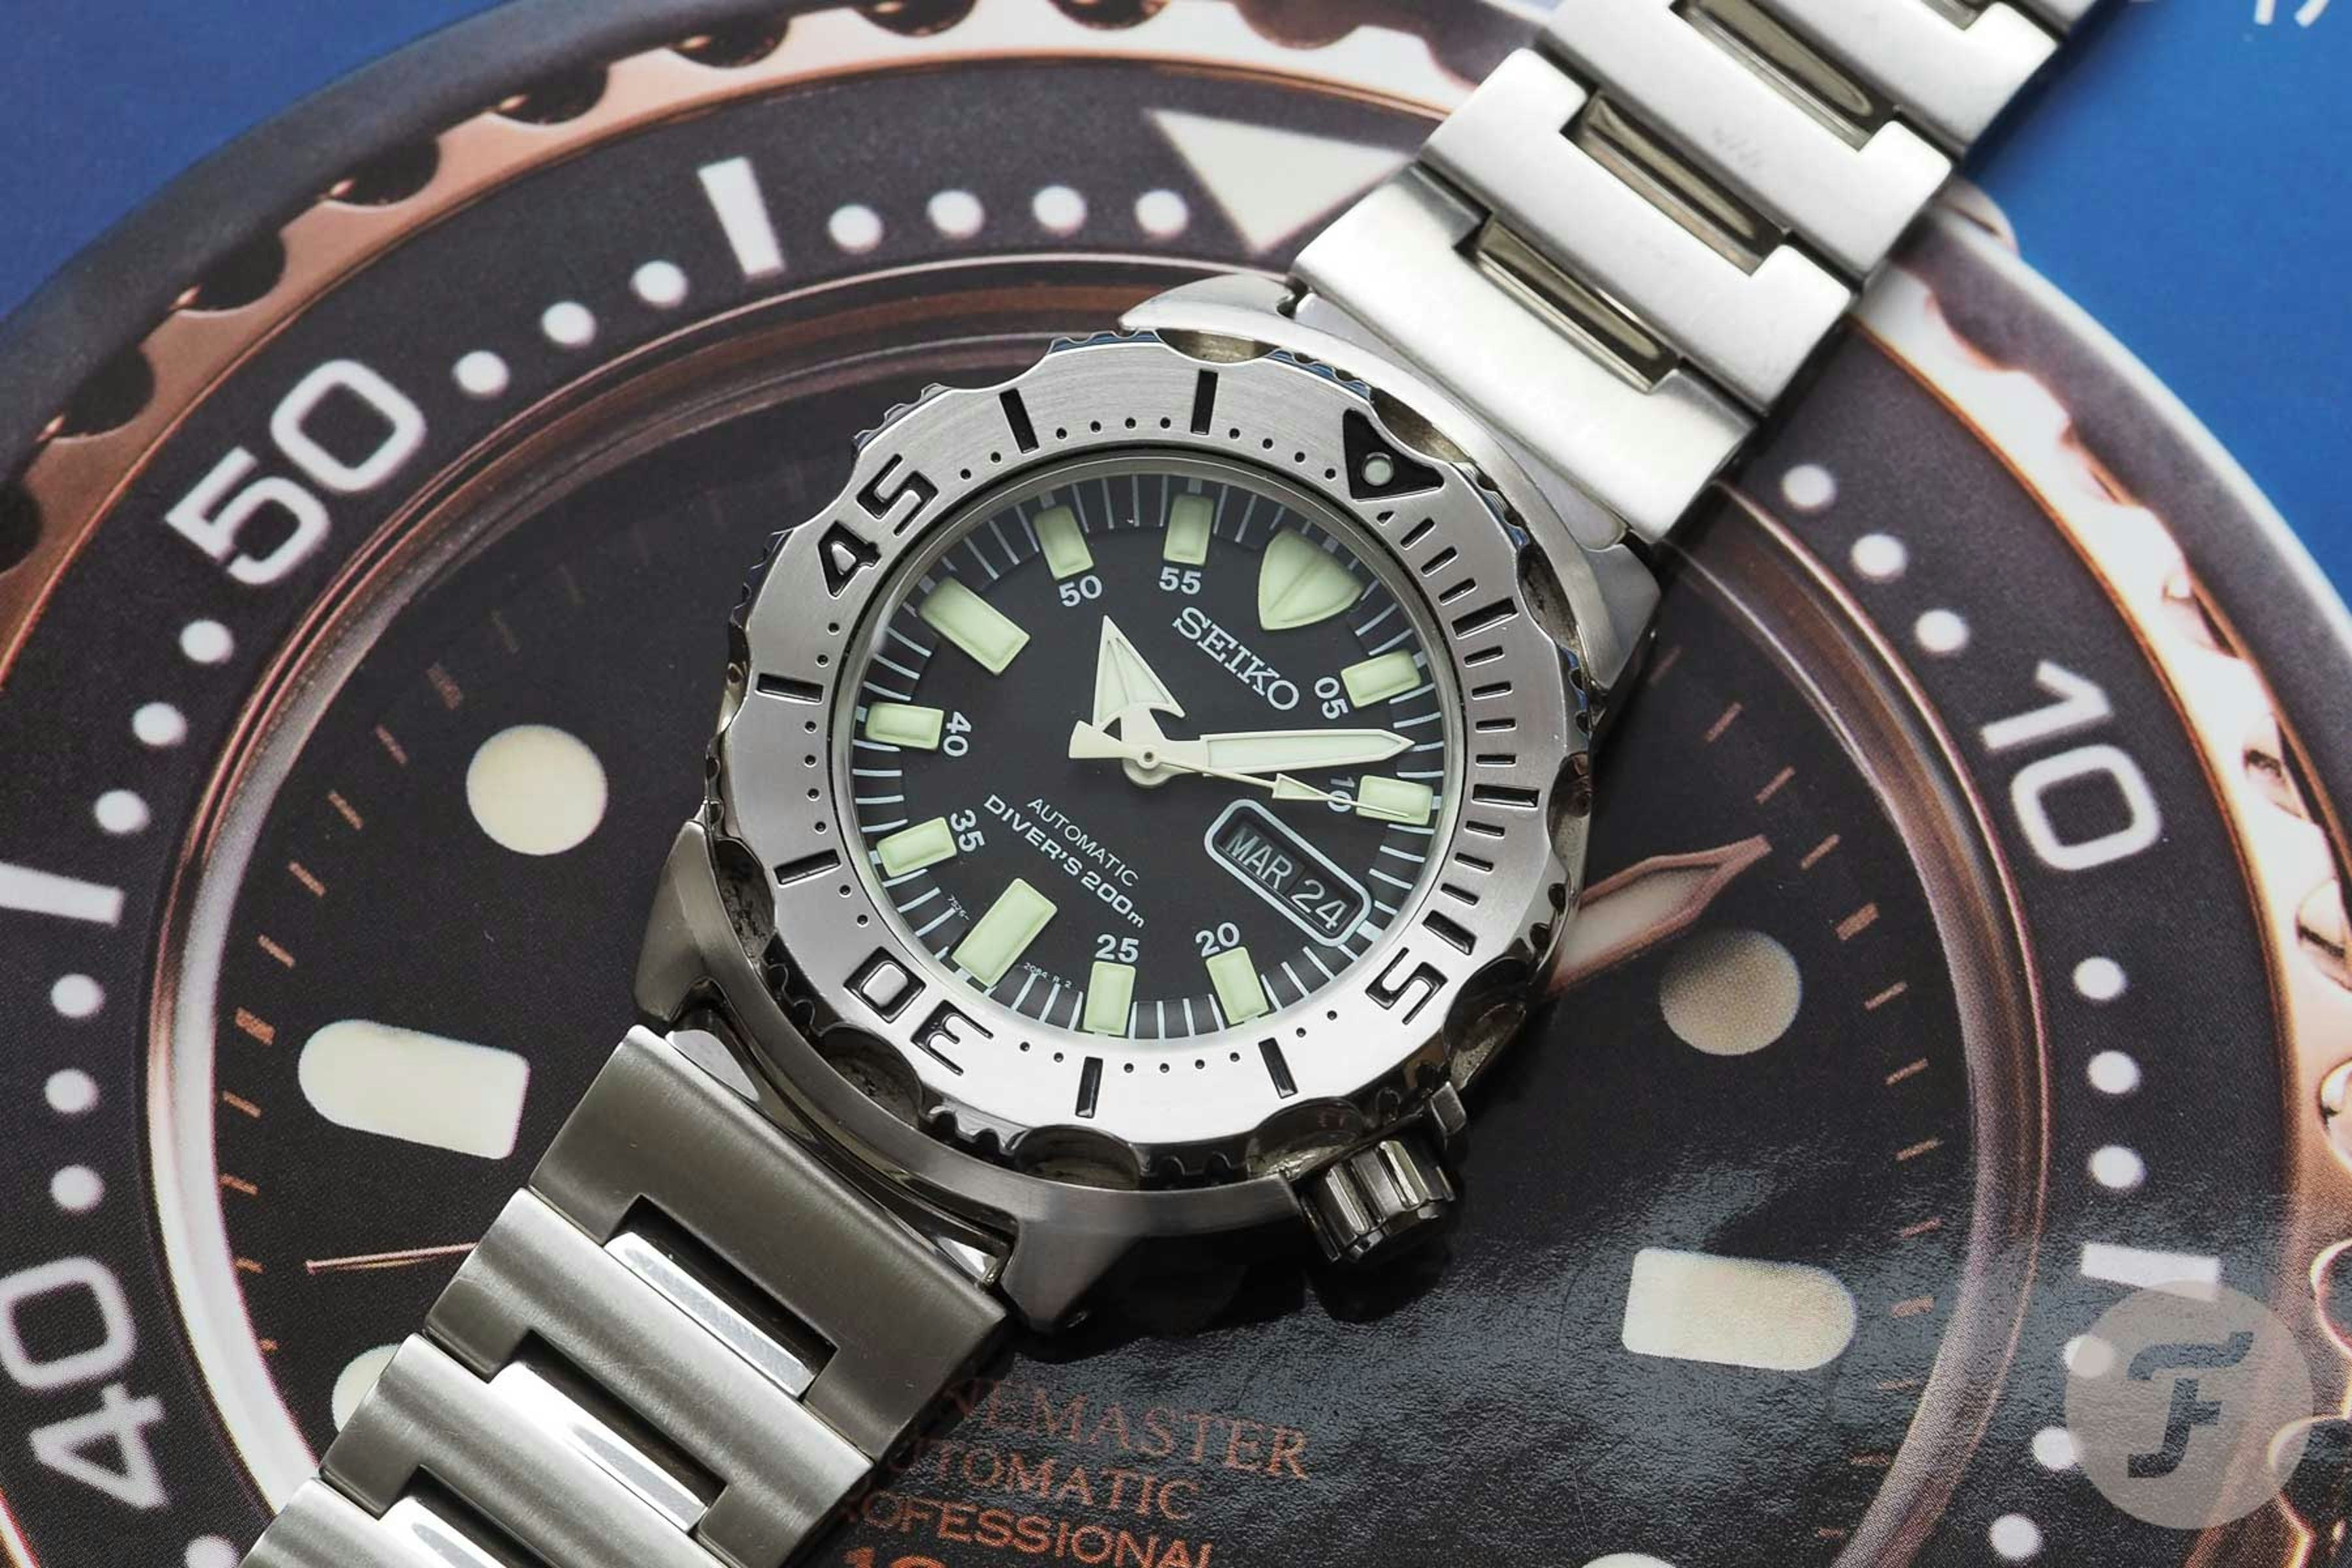 pause strop spyd Best of Watchville: A Fond Look Back At A Classic Seiko Diver, From  Fratello - Hodinkee